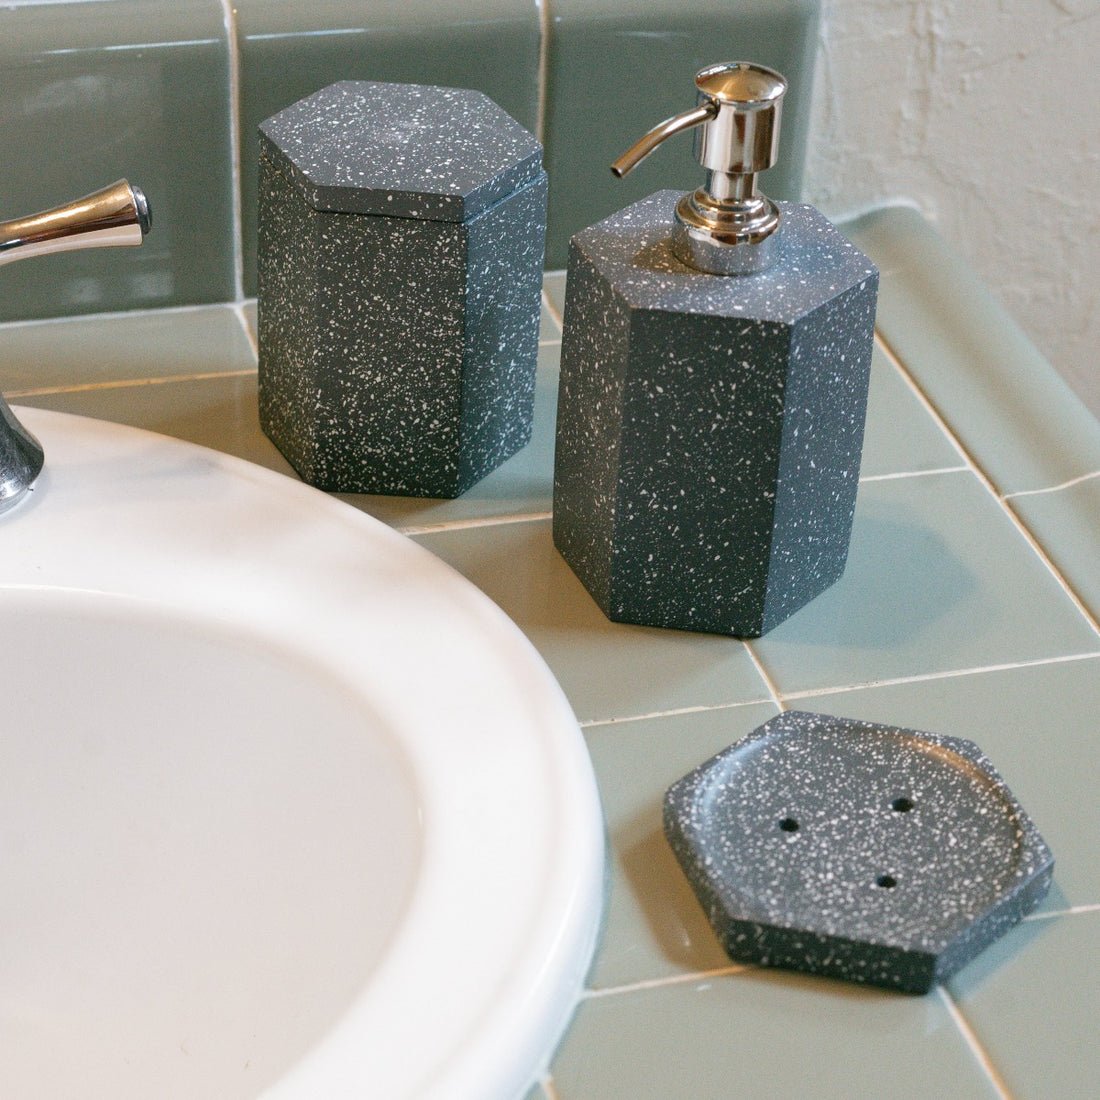 Speckled Cement Bath Canister, Slate